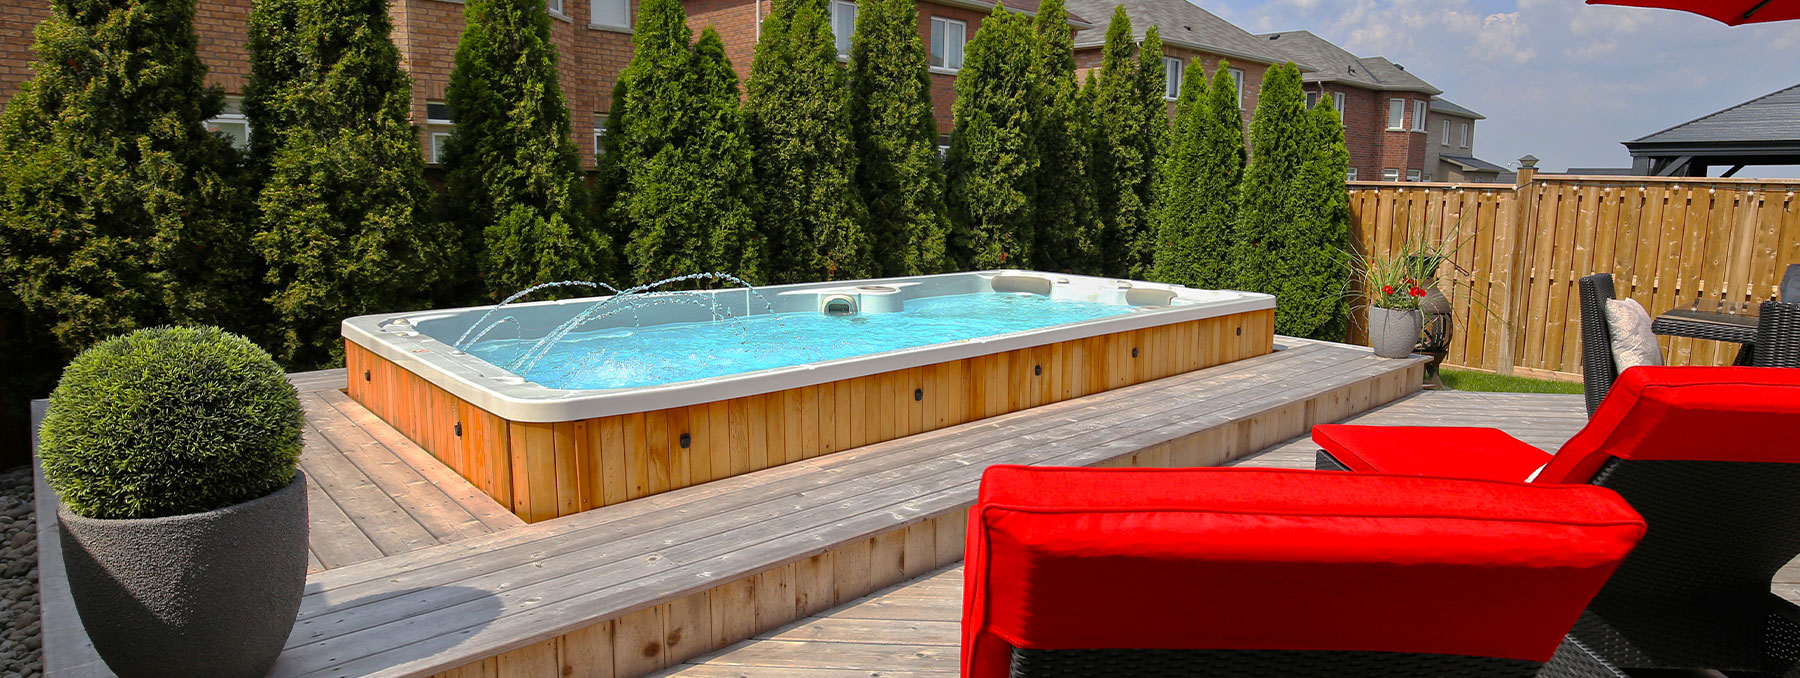 What is a swim spa and how does it differ from a regular pool or hot tub?